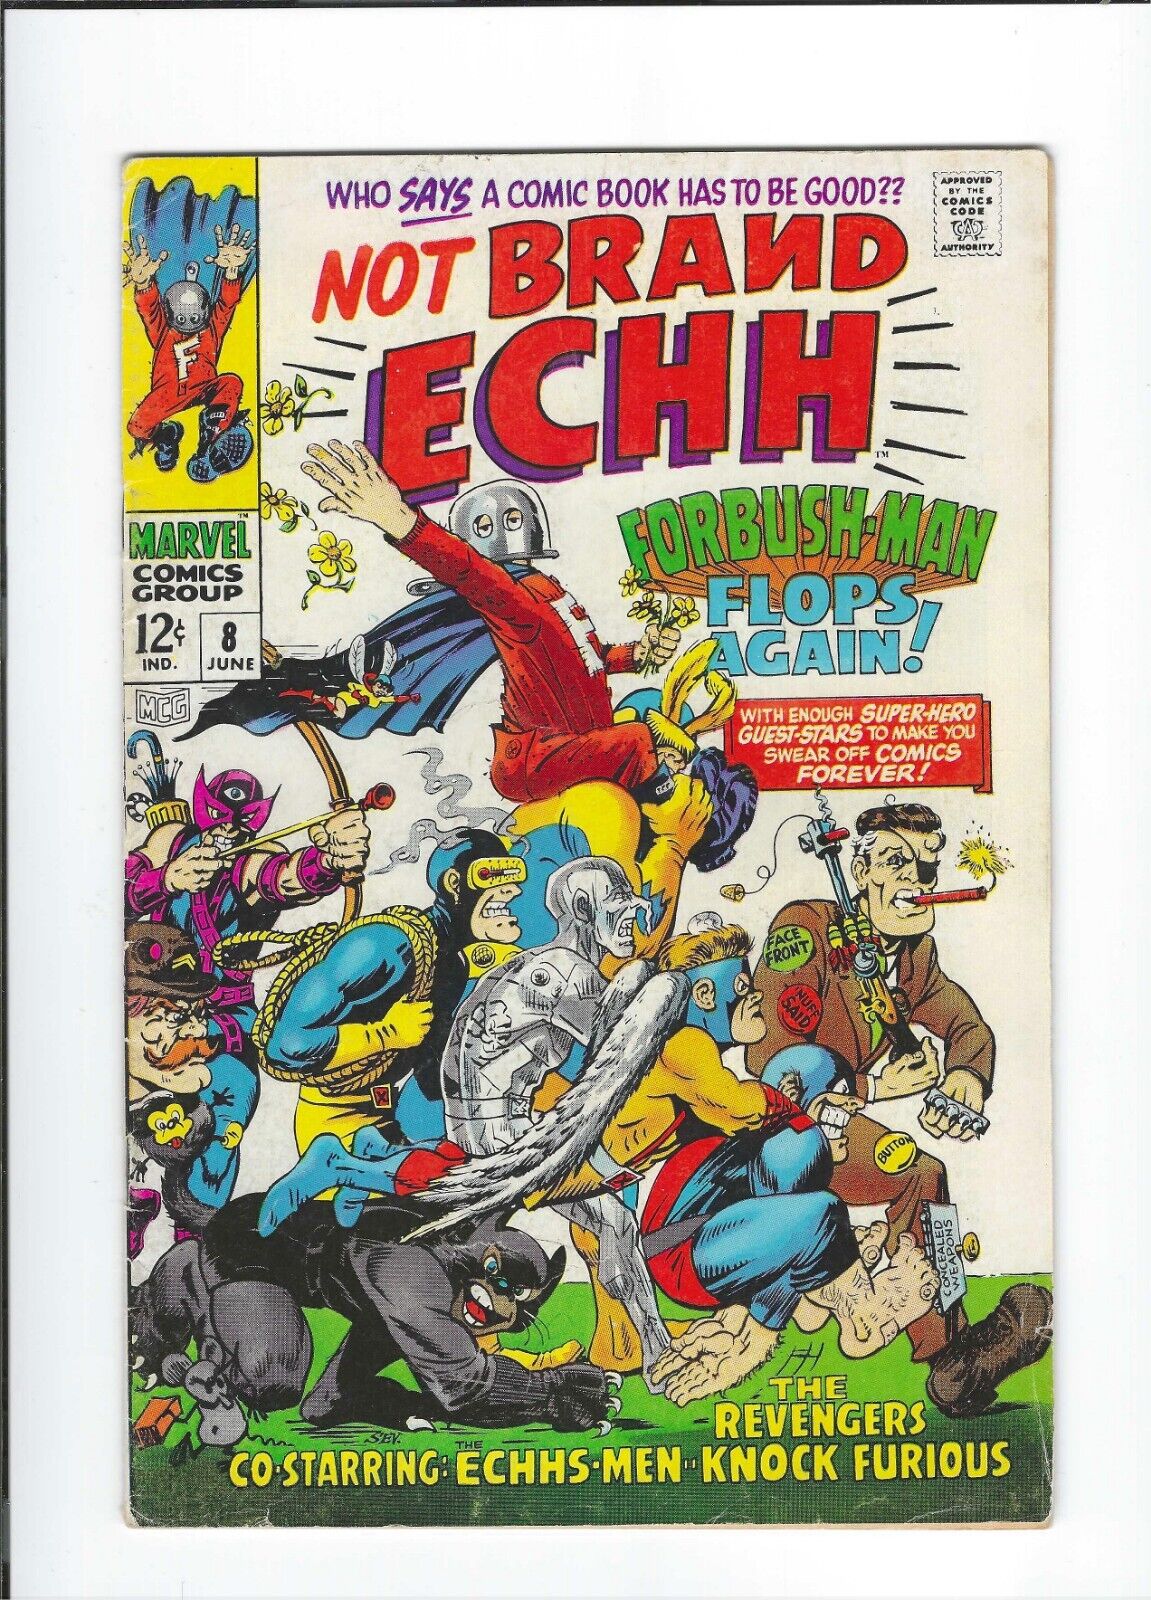 Not Brand ECHH #8: Dry Cleaned: Pressed: Bagged: Boarded FN-VF 7.0